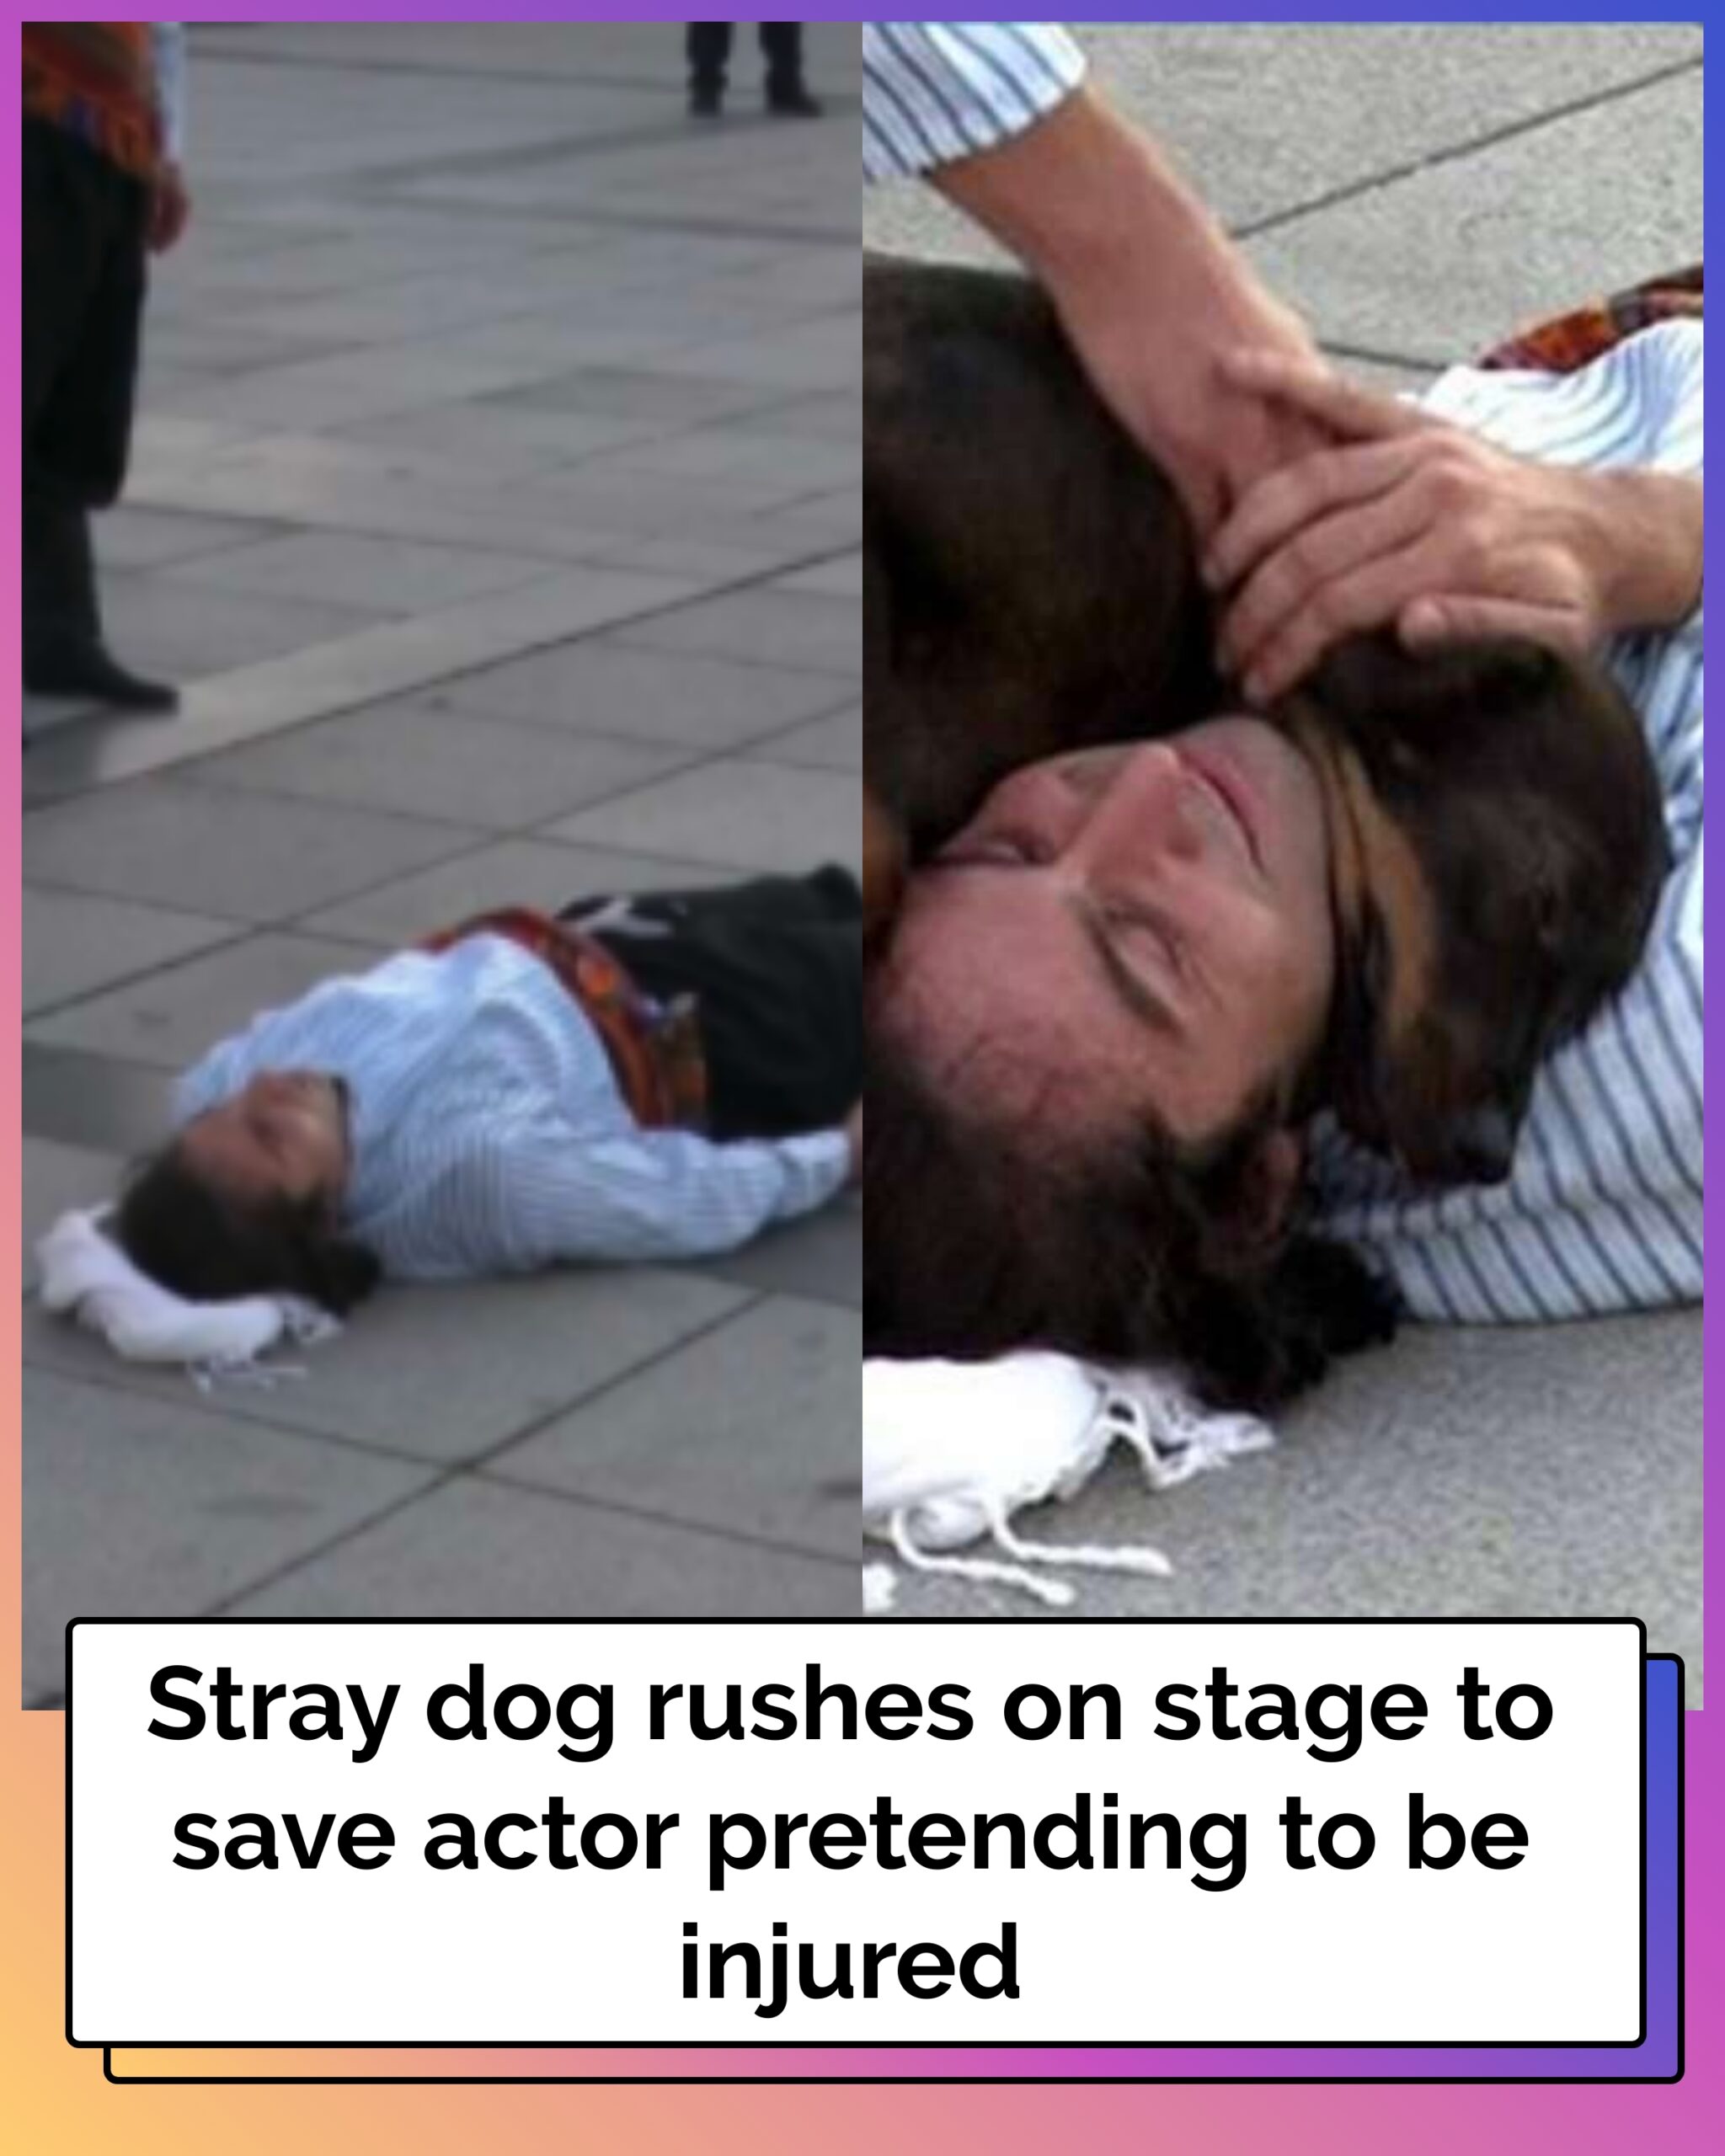 Stray Dog Rushes On Stage to Save Actor Pretending to be Injured